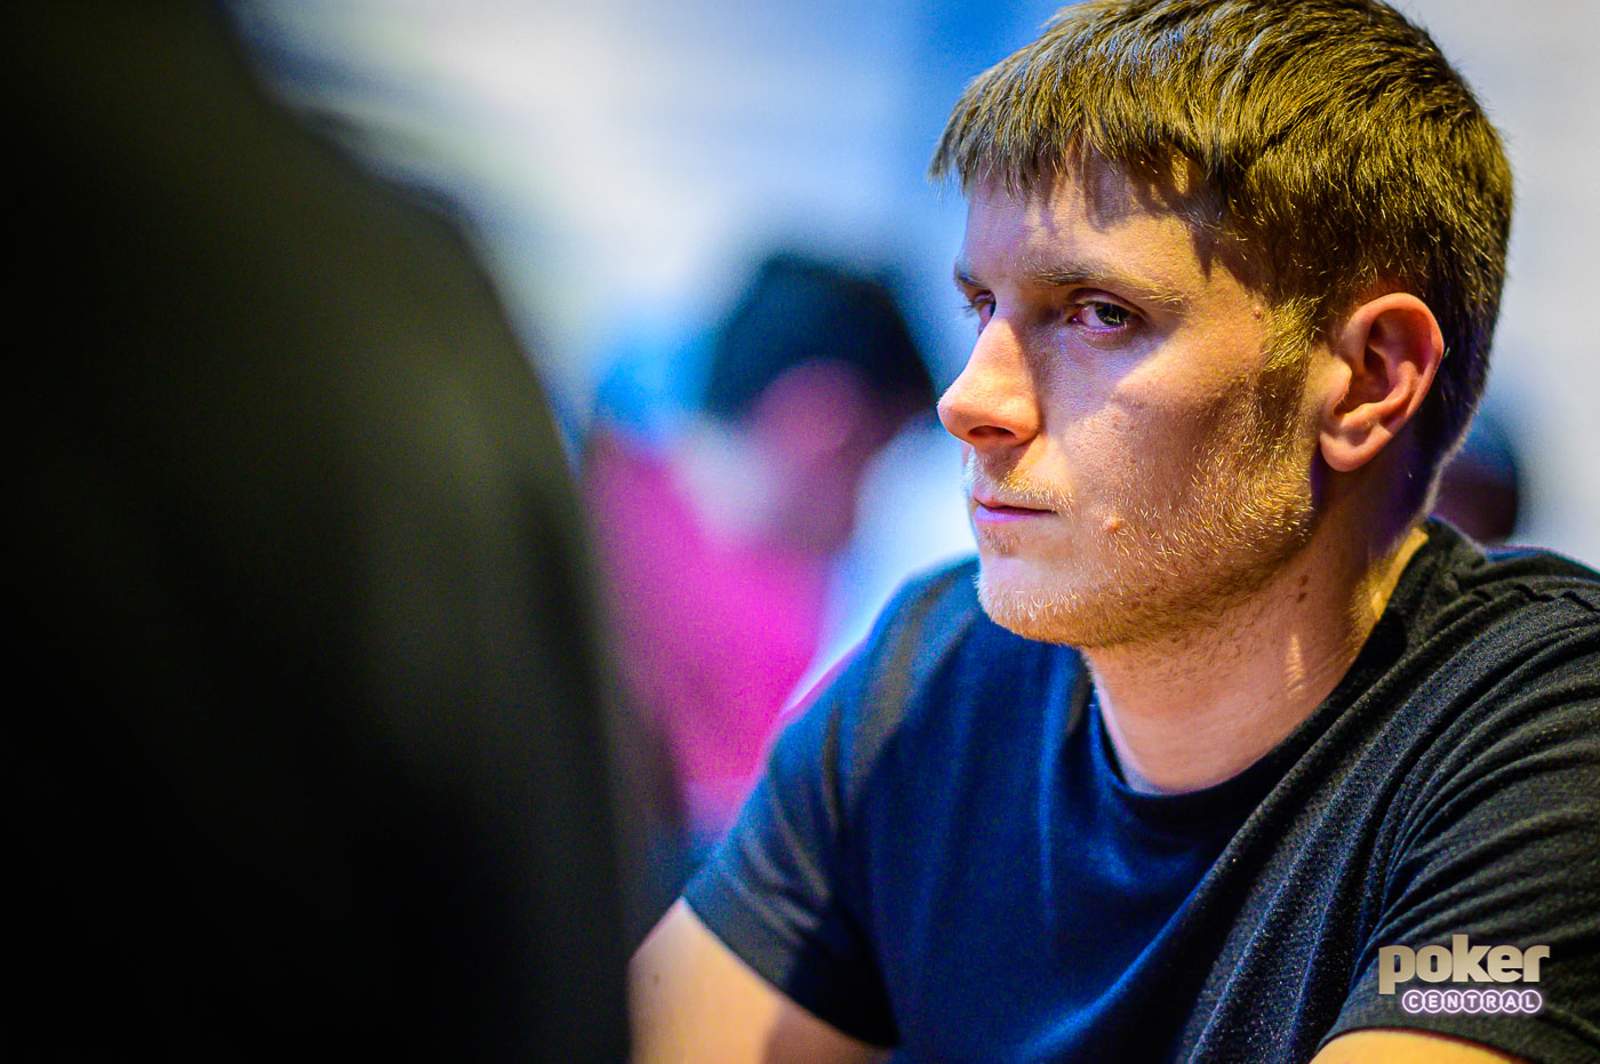 Sam Soverel Bags Chip Lead (Again), Searching for First BPO Win